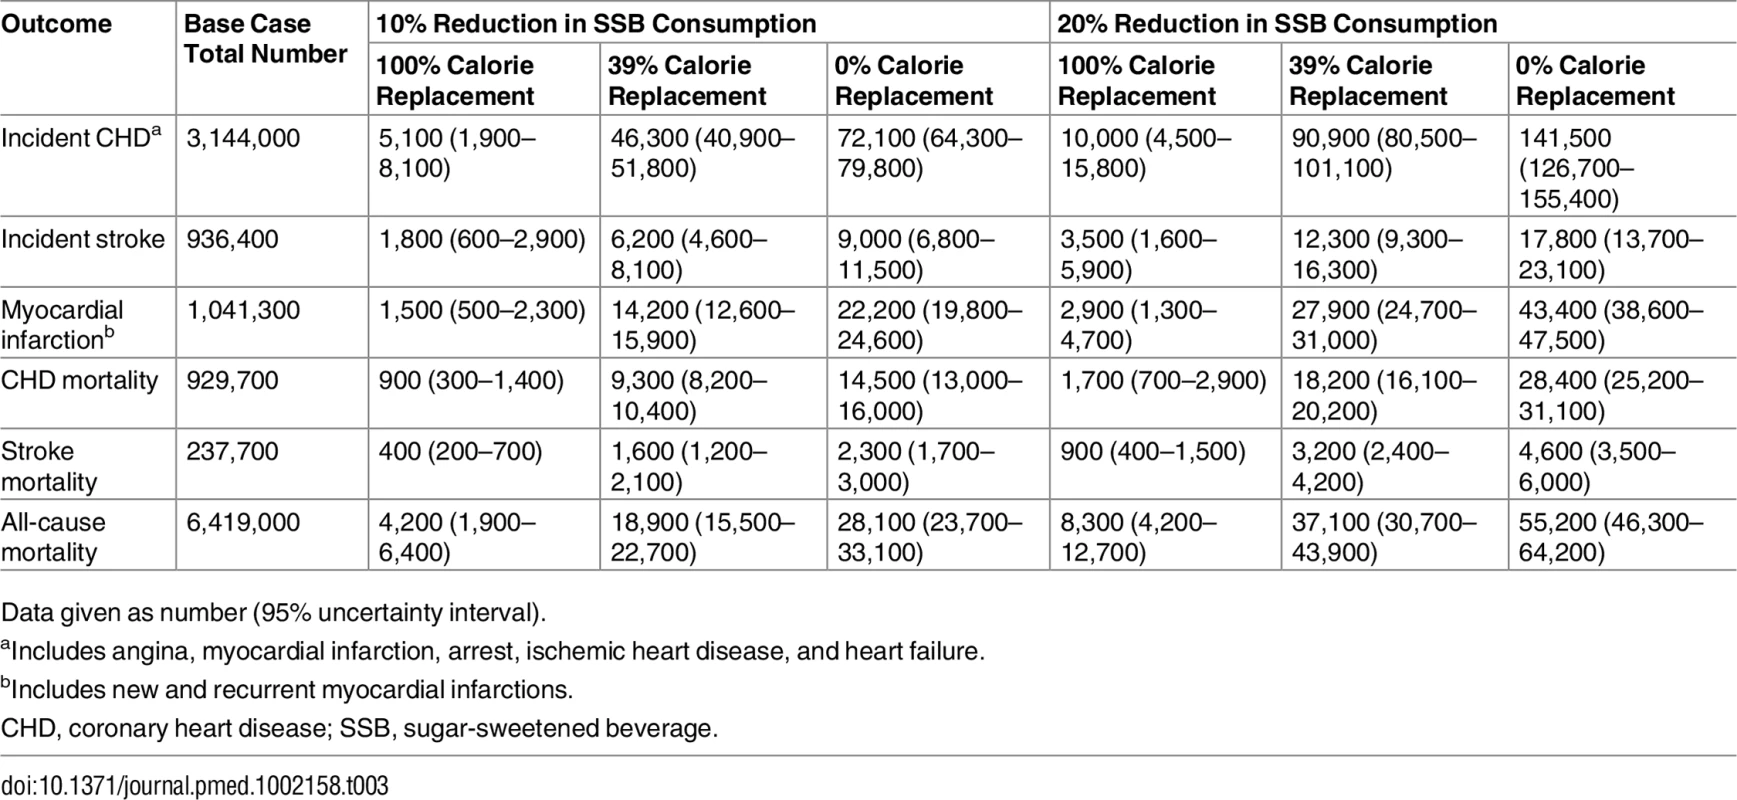 Total number of cardiovascular disease events and deaths avoided over 10 y among Mexican adults aged 35–94 y under different assumptions about sugar-sweetened beverage consumption reduction and replacement with calories from other sources.